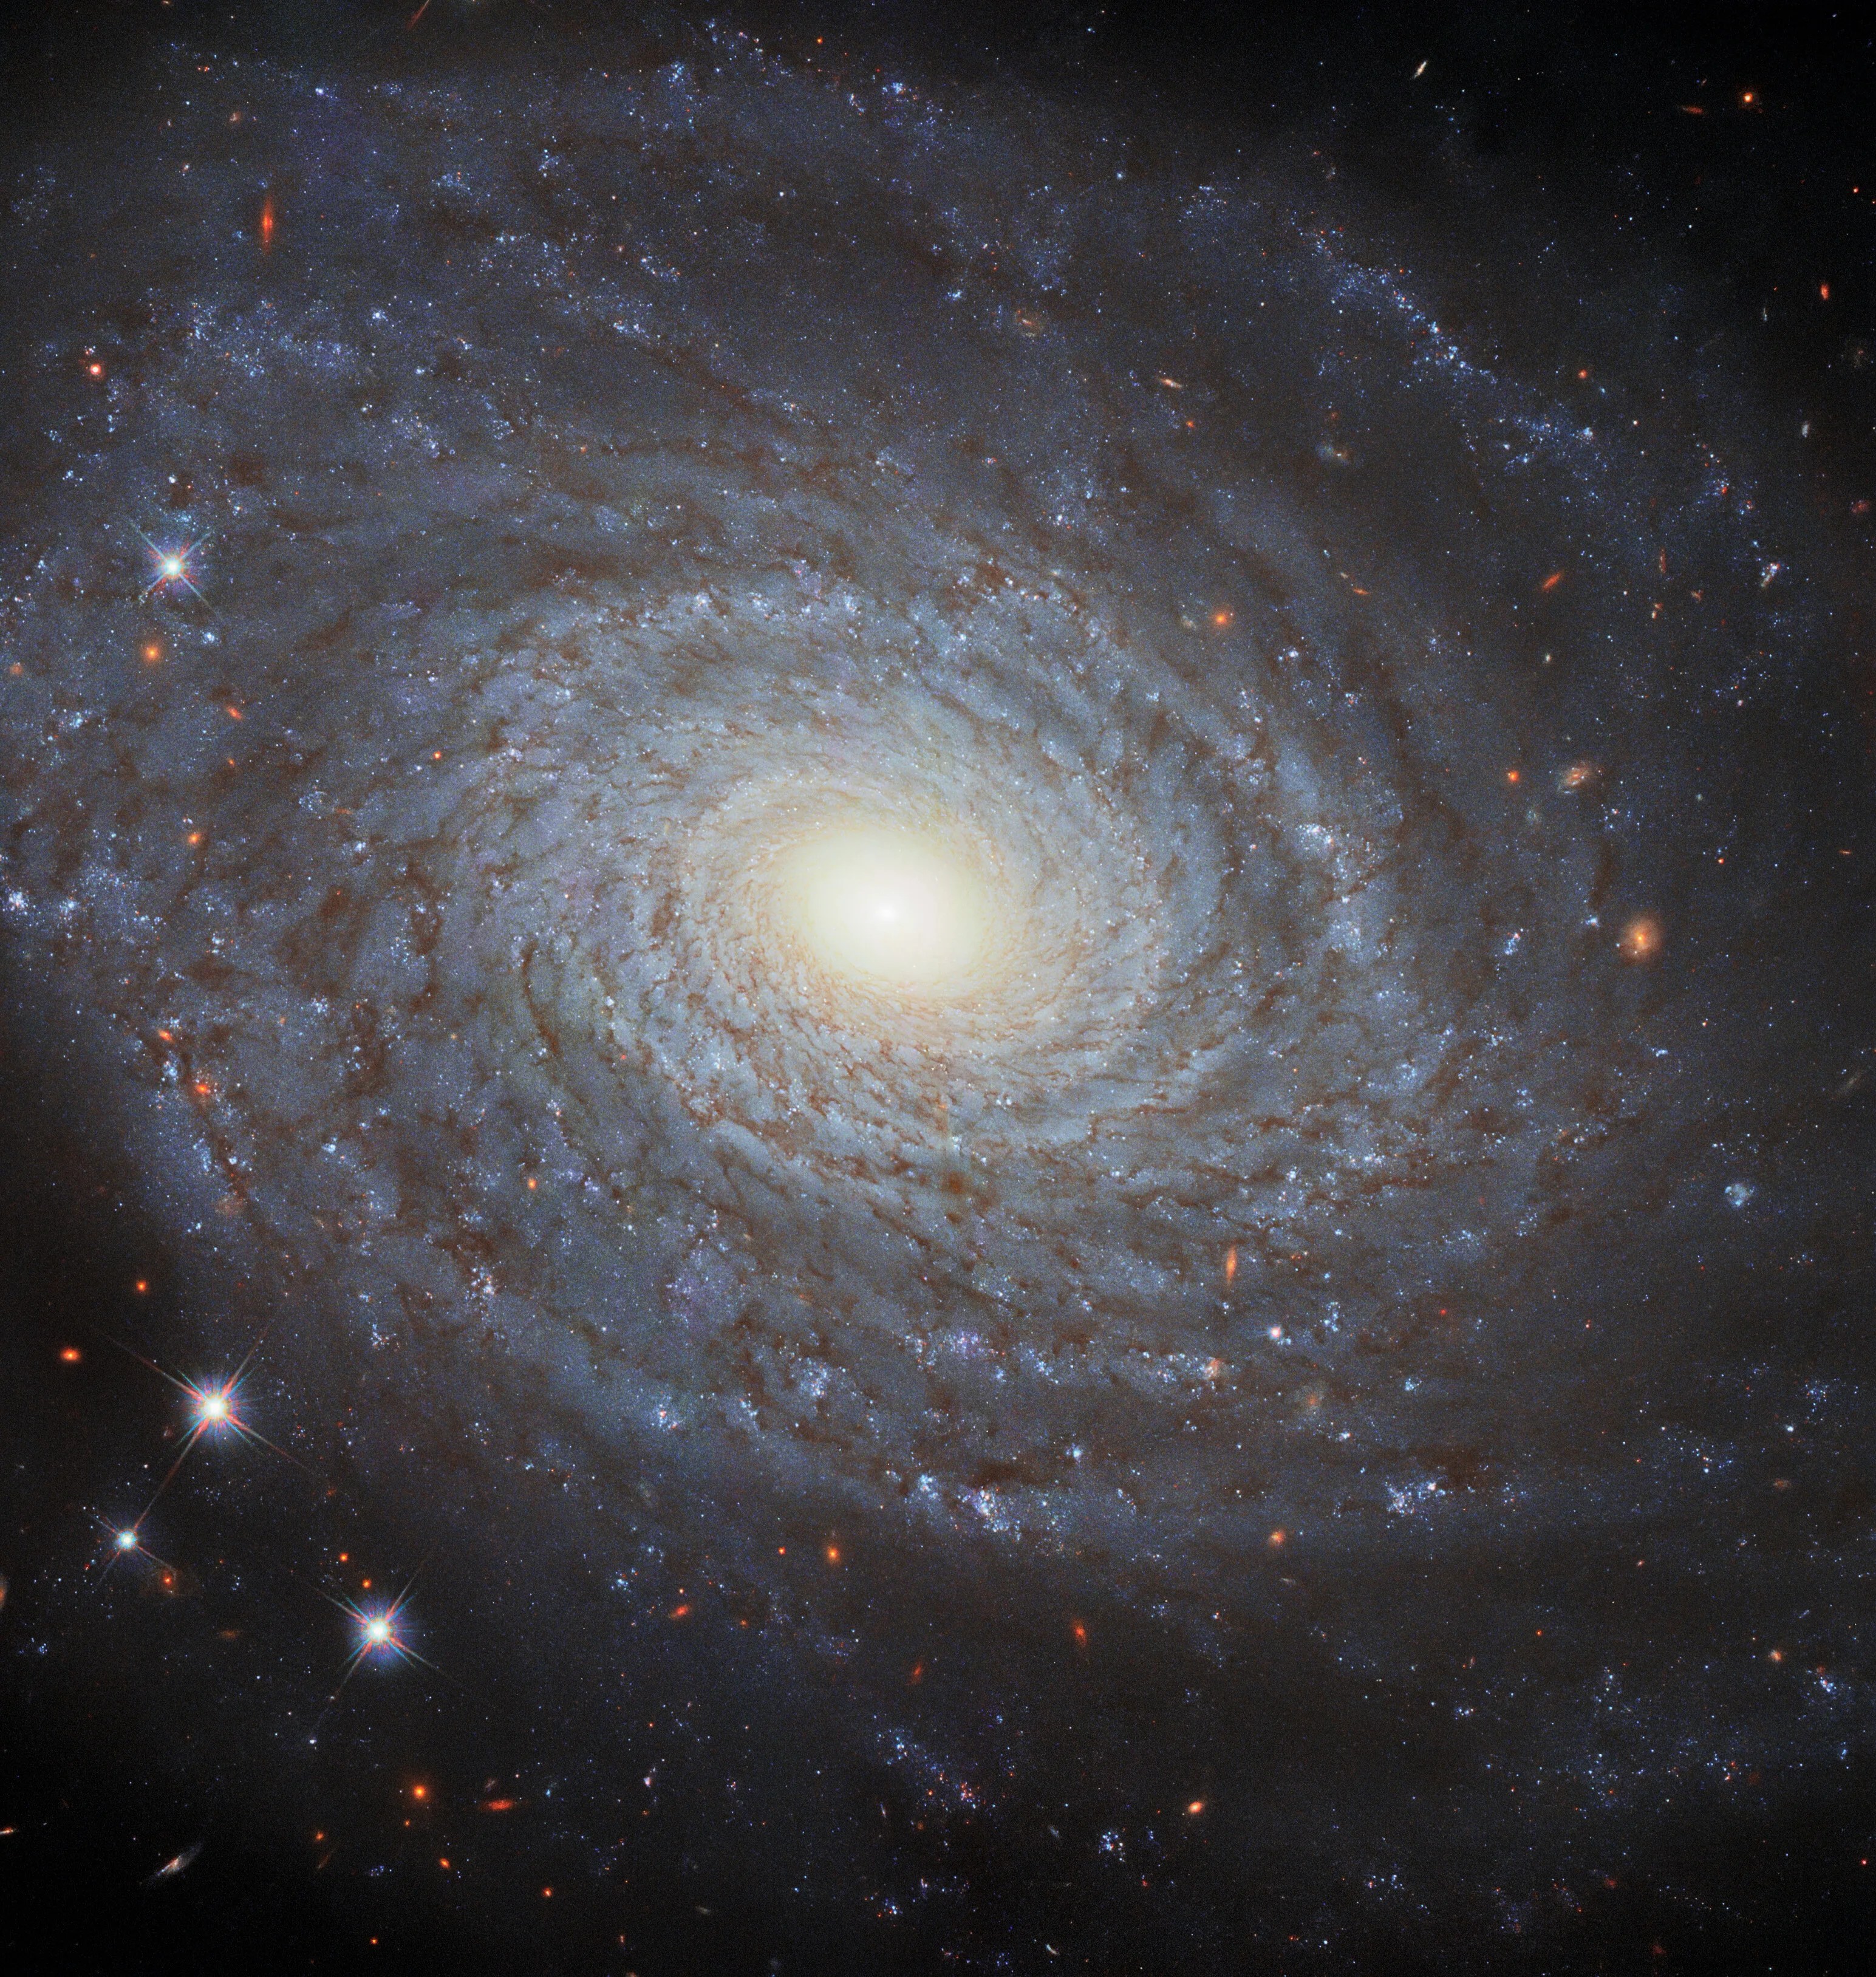 This image features the spiral galaxy ngc 691, imaged in fantastic detail by hubble’s wide field camera 3 (wfc3).